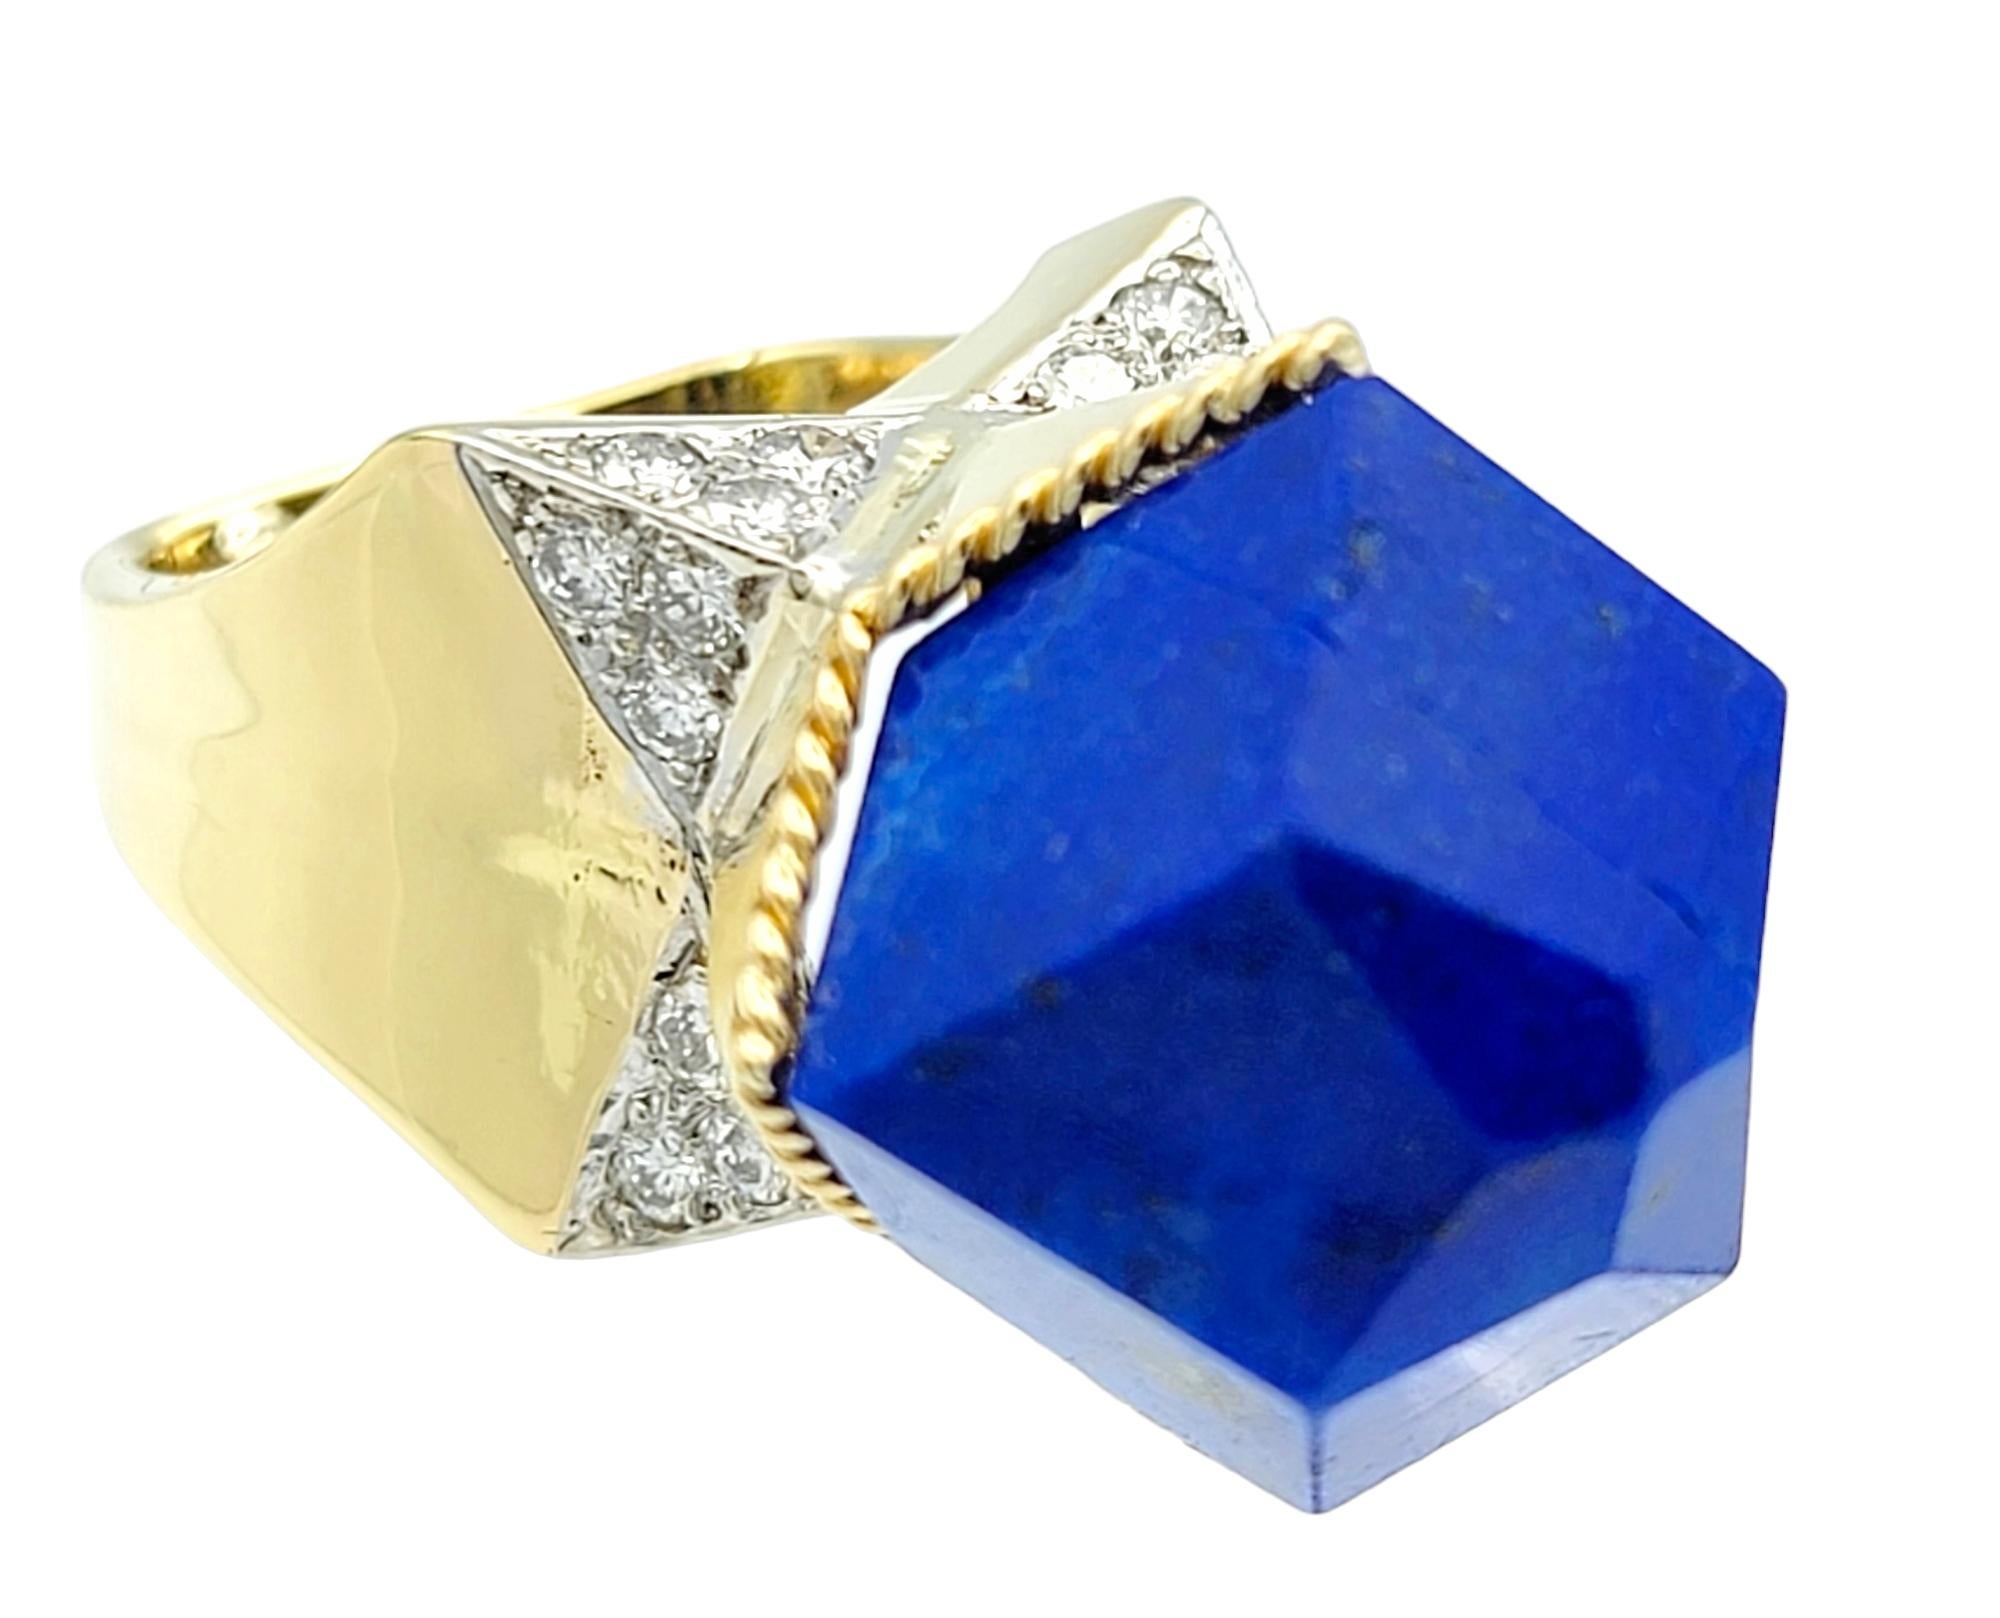 Ring comfortably fits on a size 5.5 but has sizing beads for adjustment.

This incredible lapis lazuli and 18 karat yellow gold ring is a captivating statement piece fit for any special occasion. At its heart lies a resplendent 21-sided polygon,